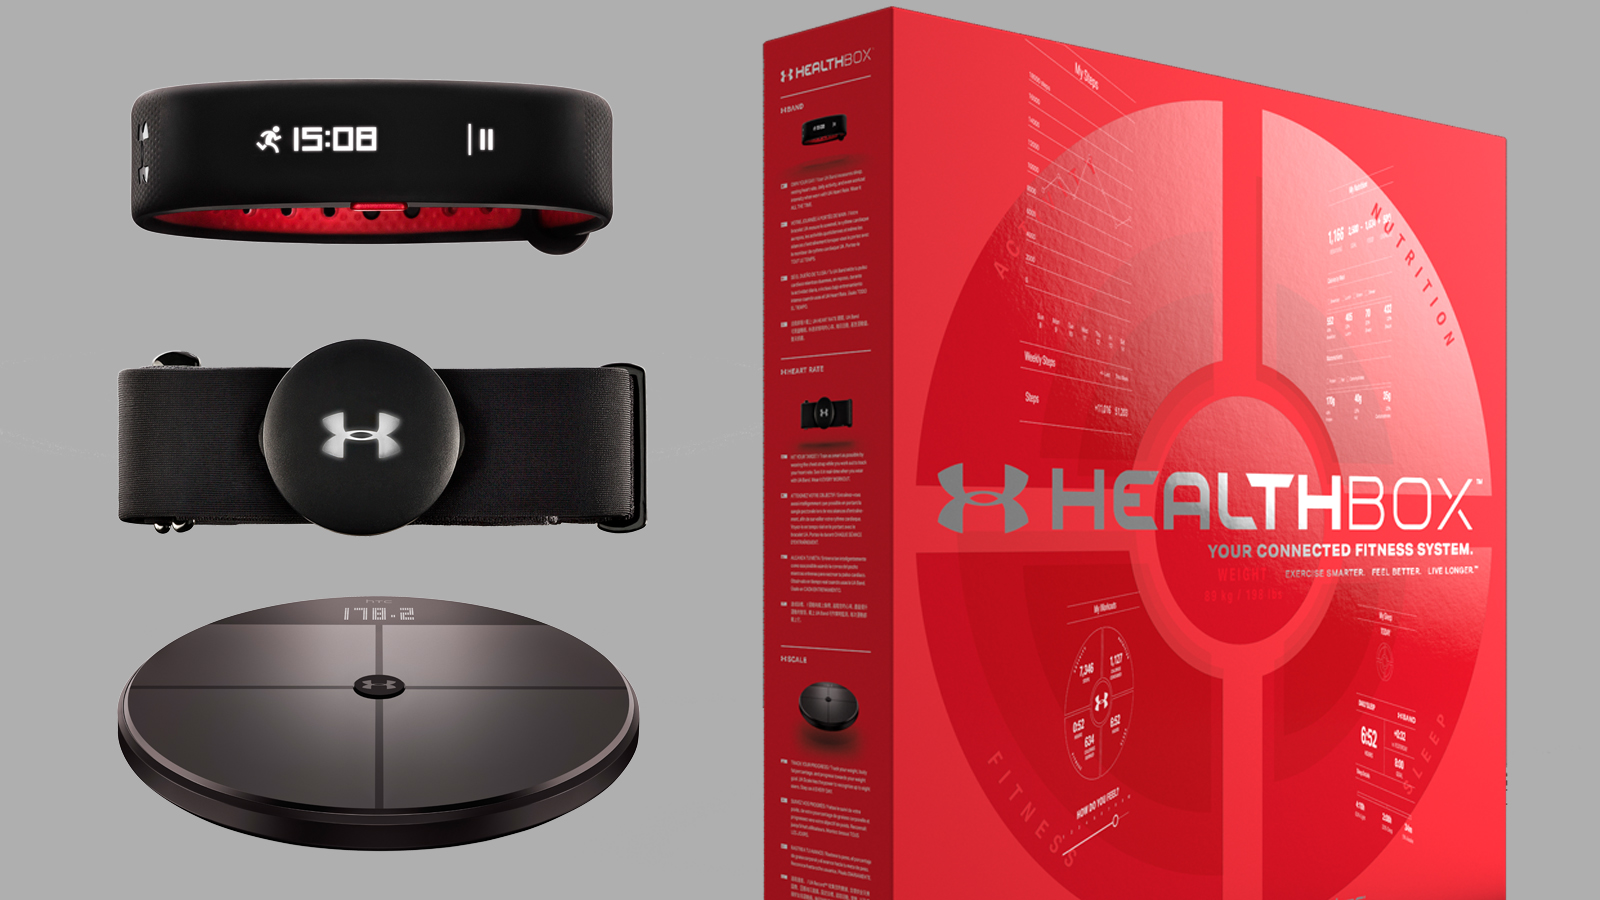 Contra la voluntad Agradecido todos los días Under Armour and HTC created a fitness kit for the connected age | TechRadar